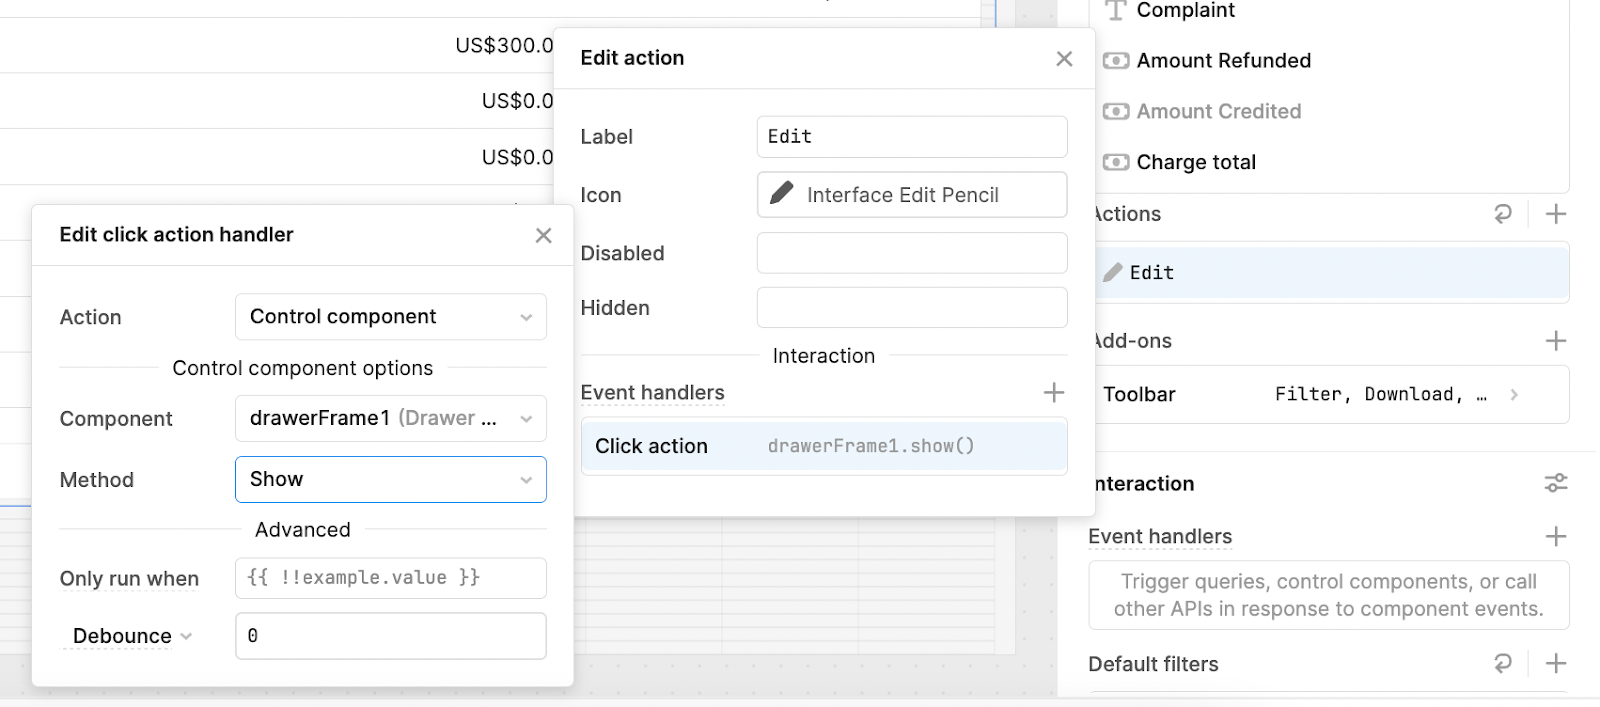 Create a CRUD app from Google Sheets in <1 hour with Retool